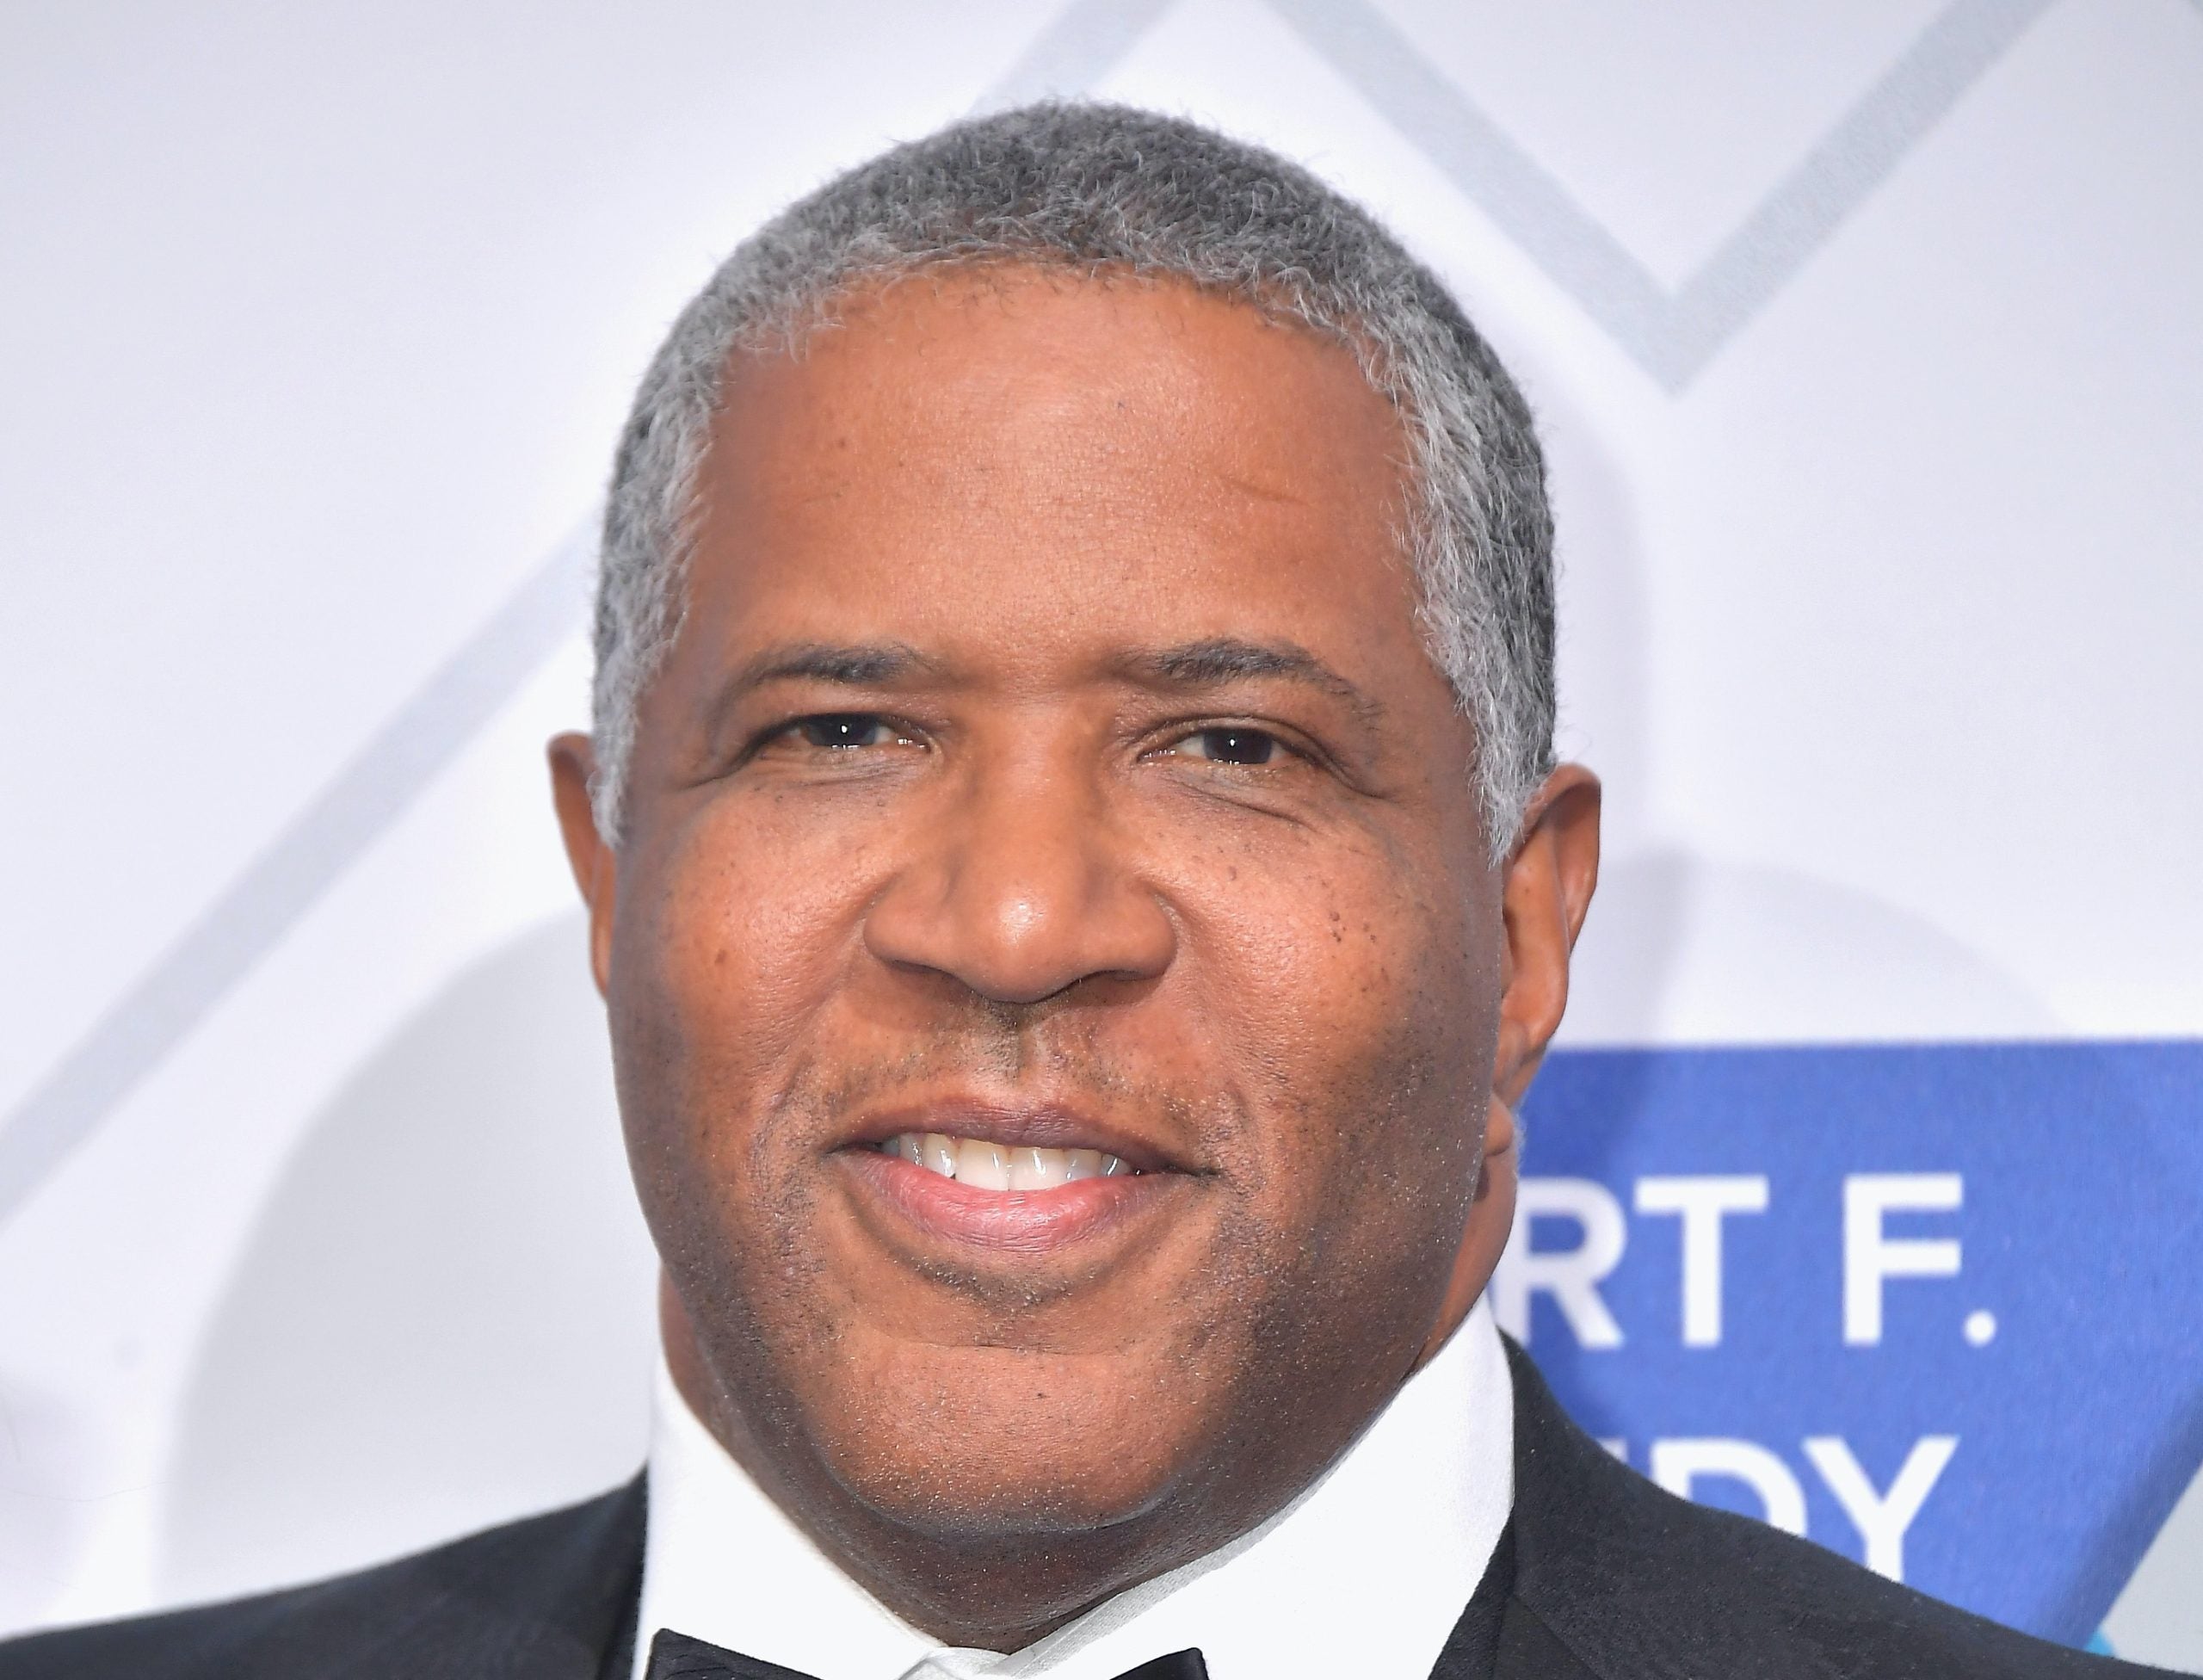 Deepak Chopra And Robert F. Smith Launch Initiative To Bolster Leadership and Mental Wellness In The Black Community 